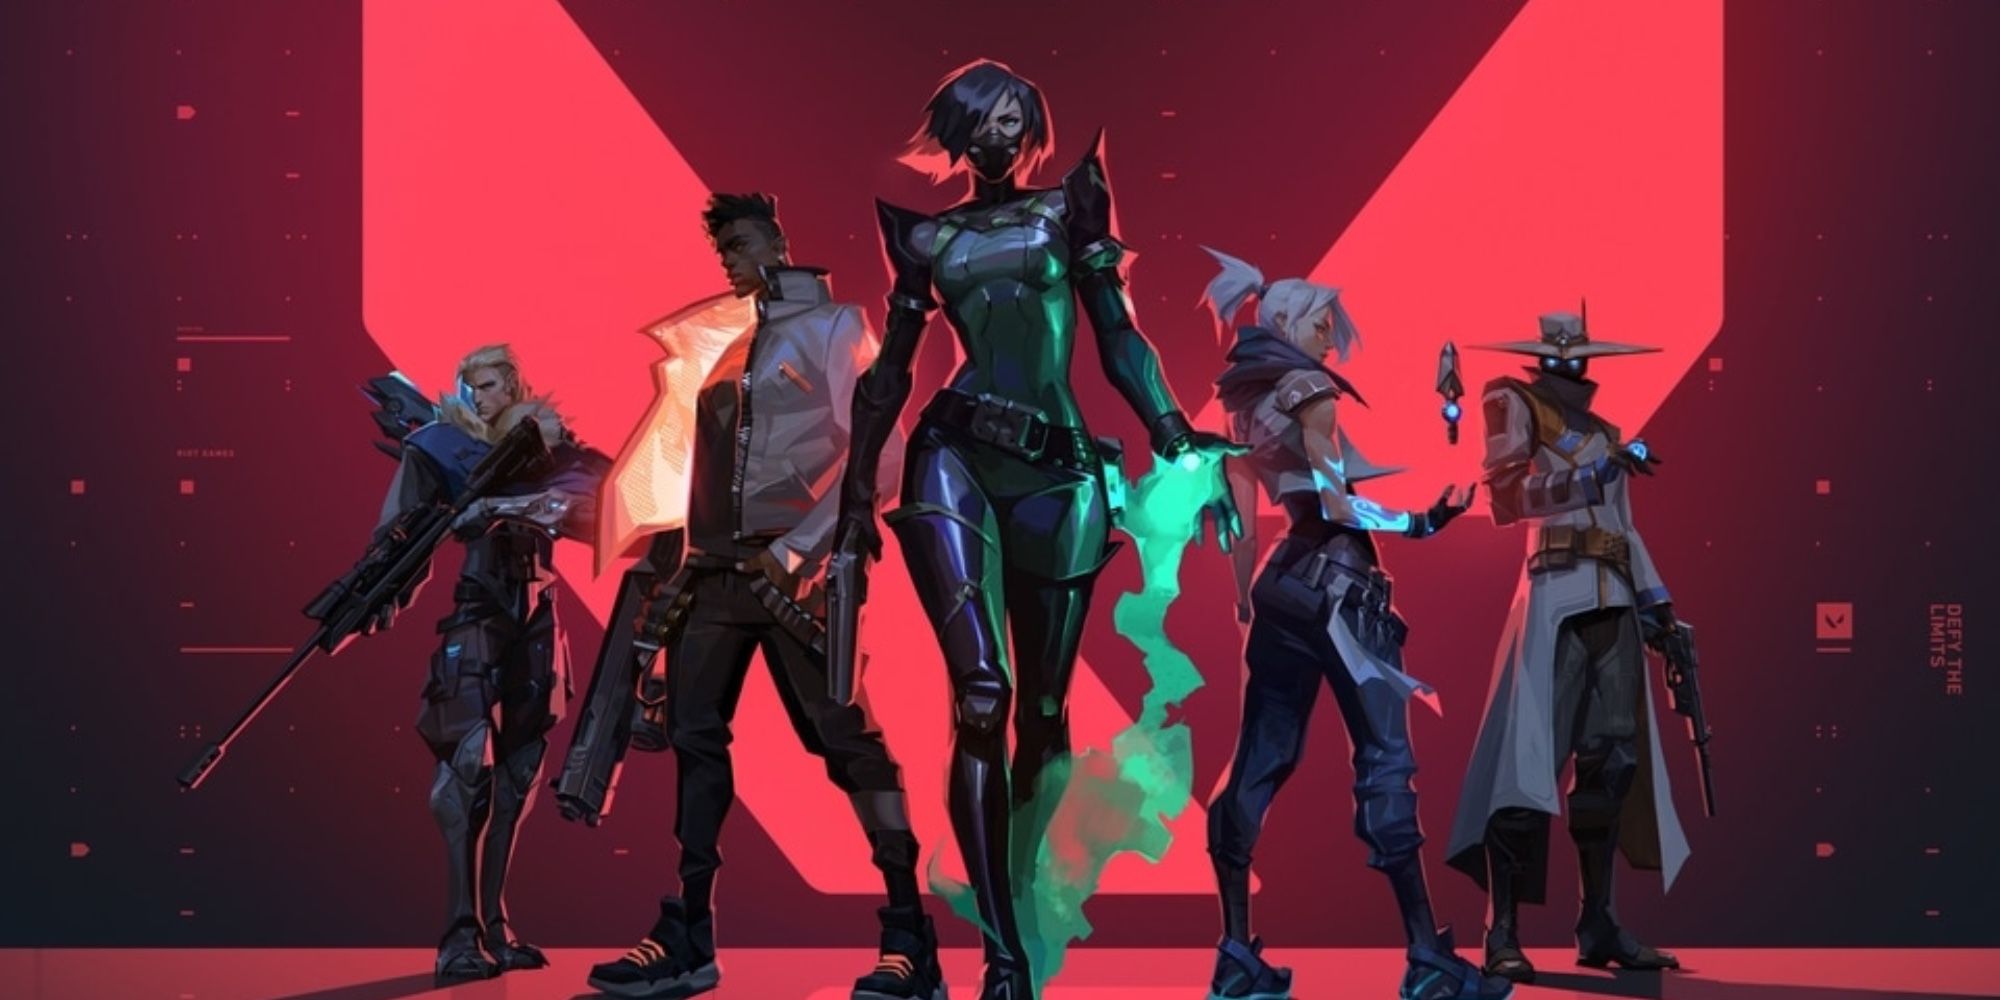 Valorant key art showing off five of its heroes